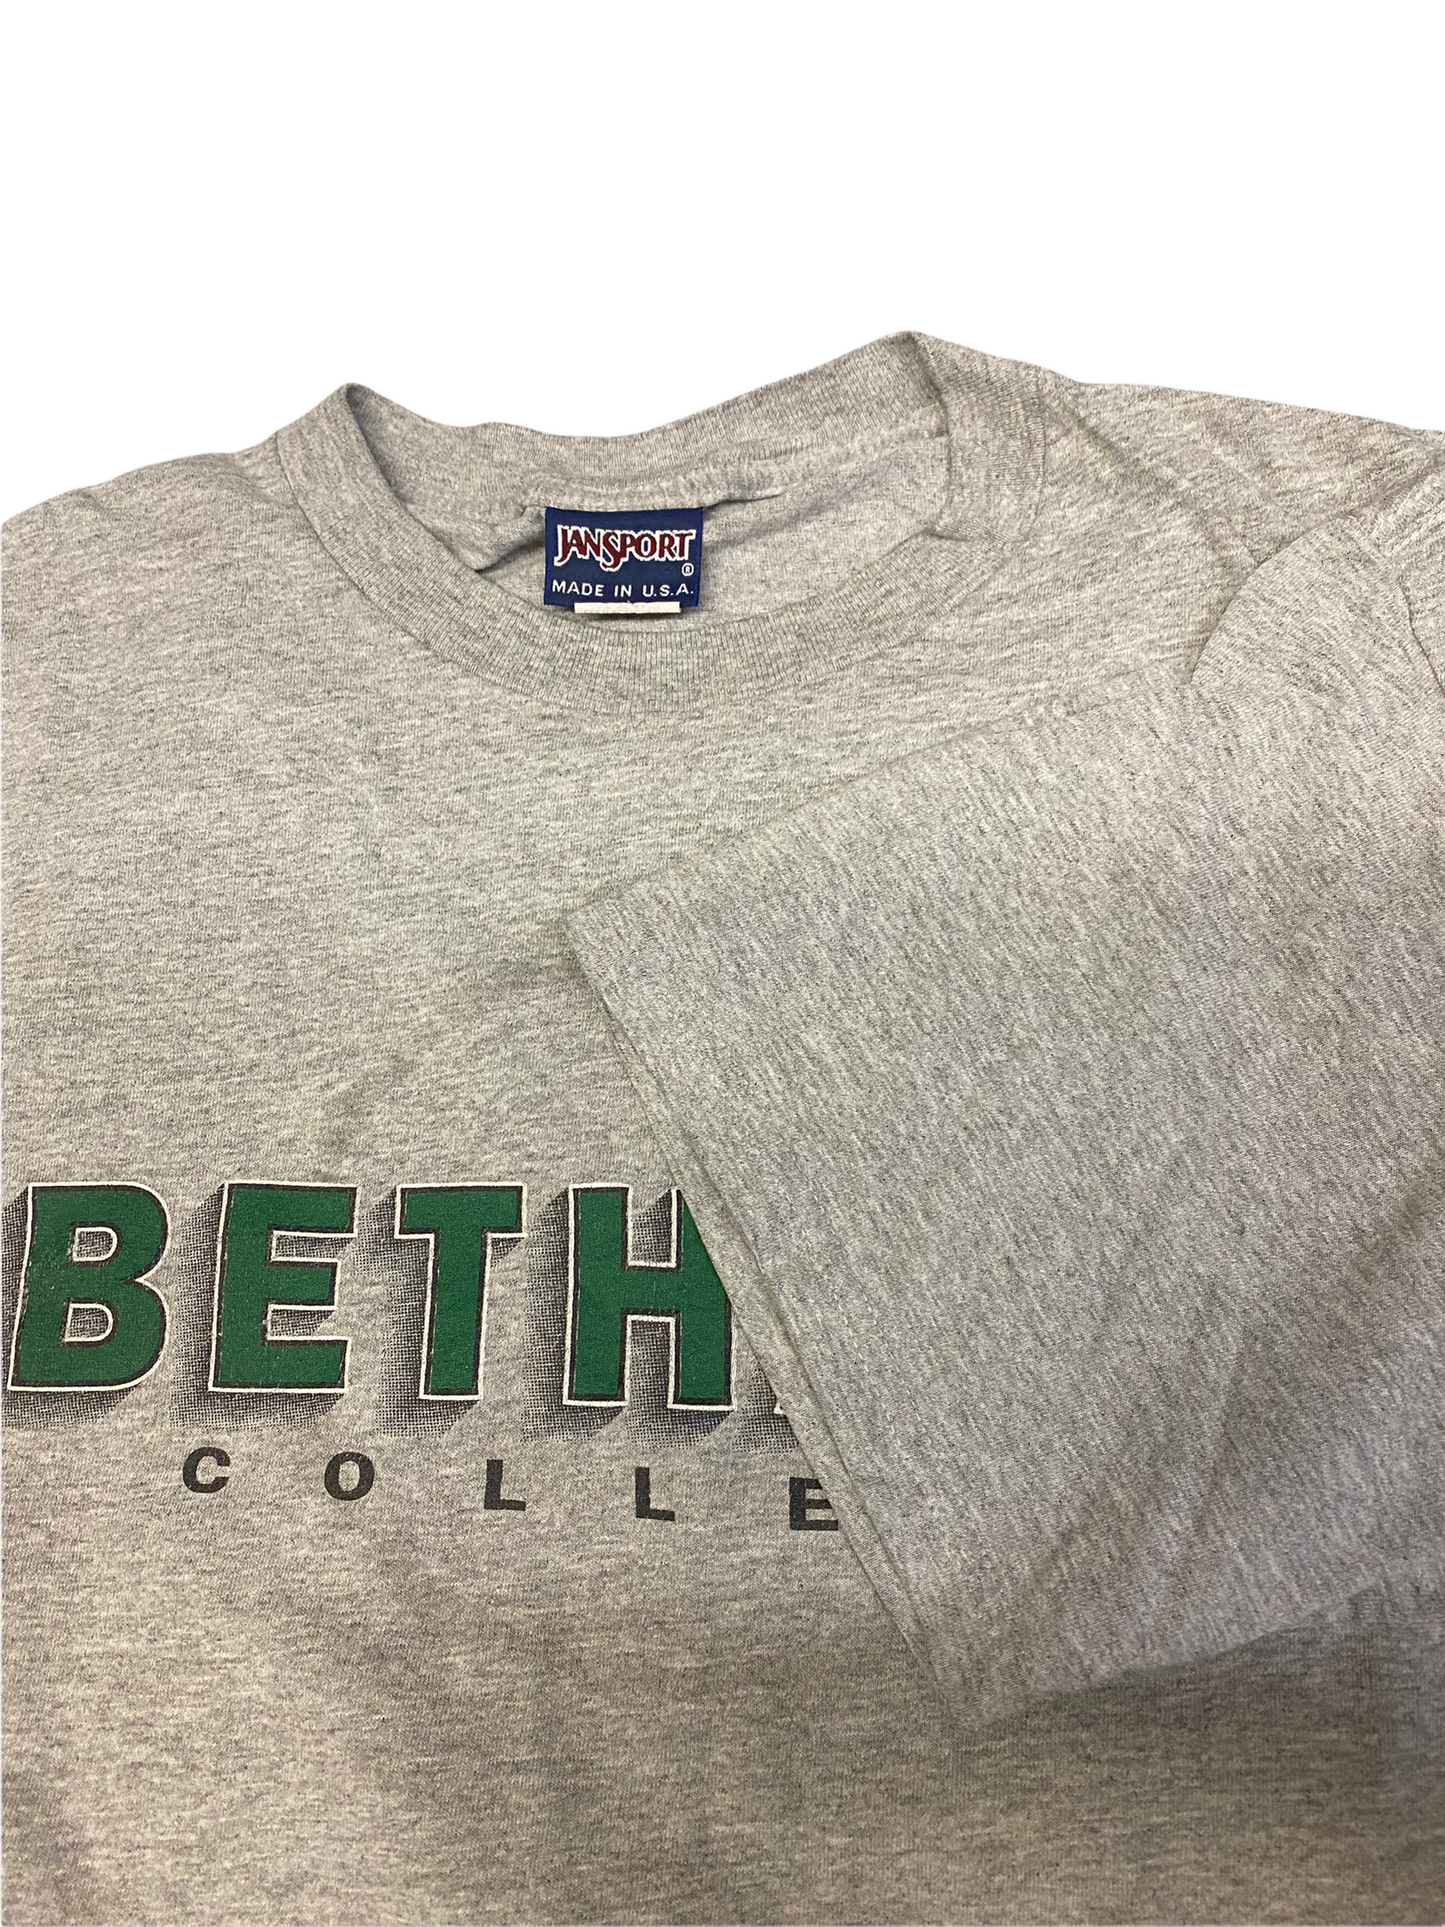 (L) Vintage Bethany College Tee